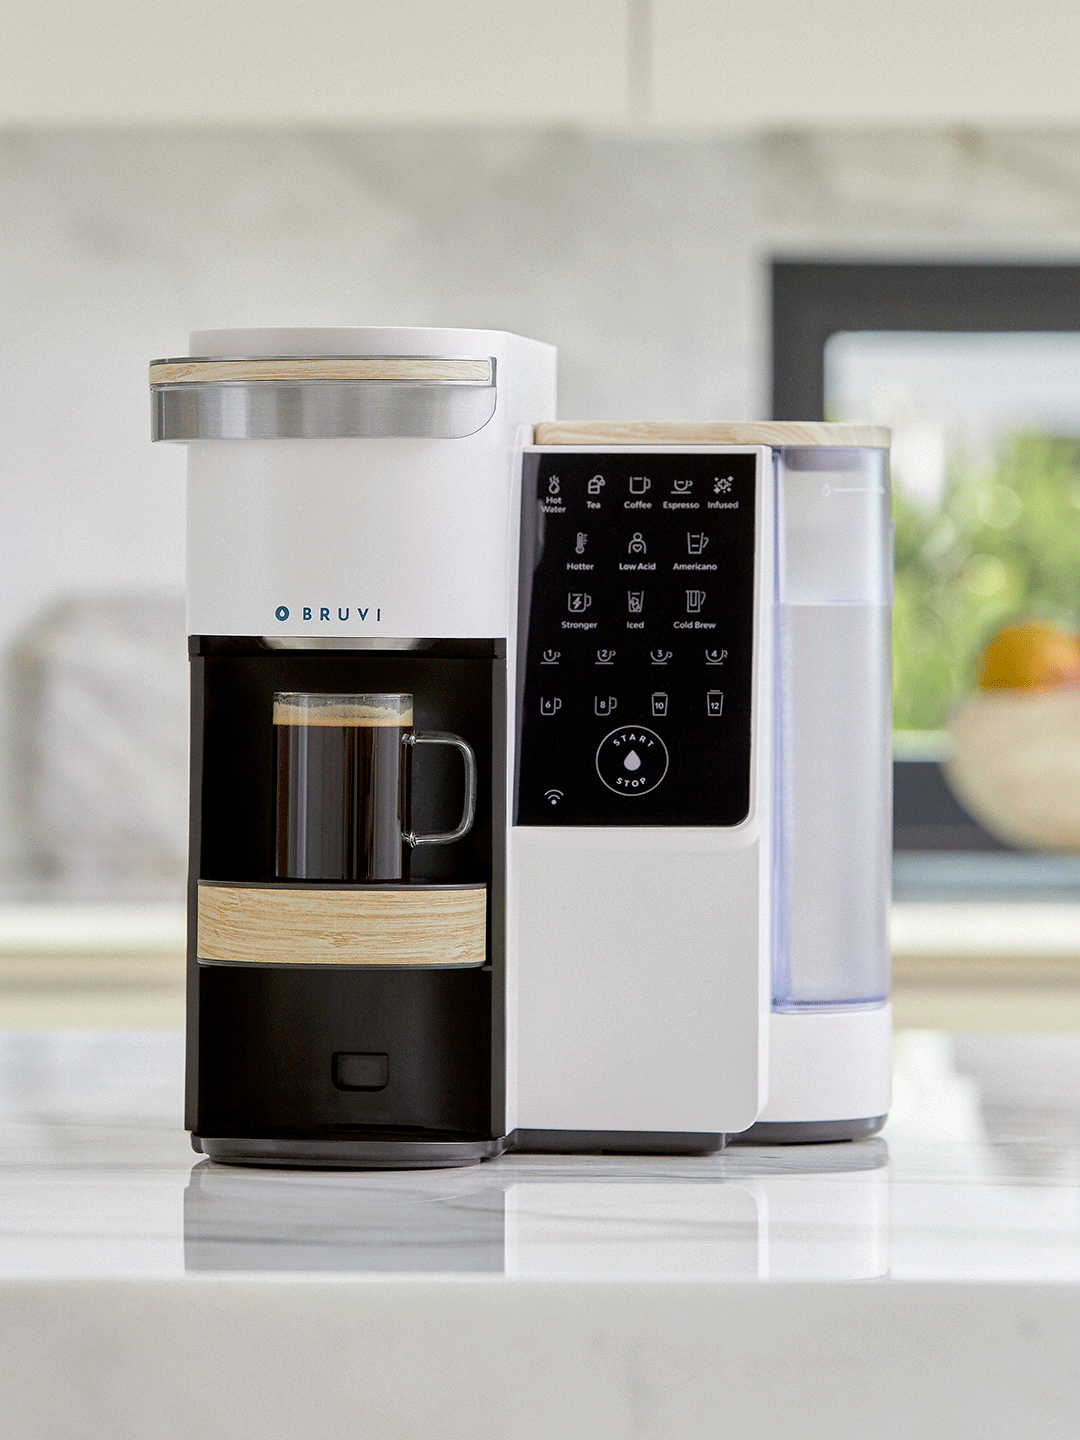 With This New Pod-Style Brewer, I Can Make a Cup of Coffee From Bed